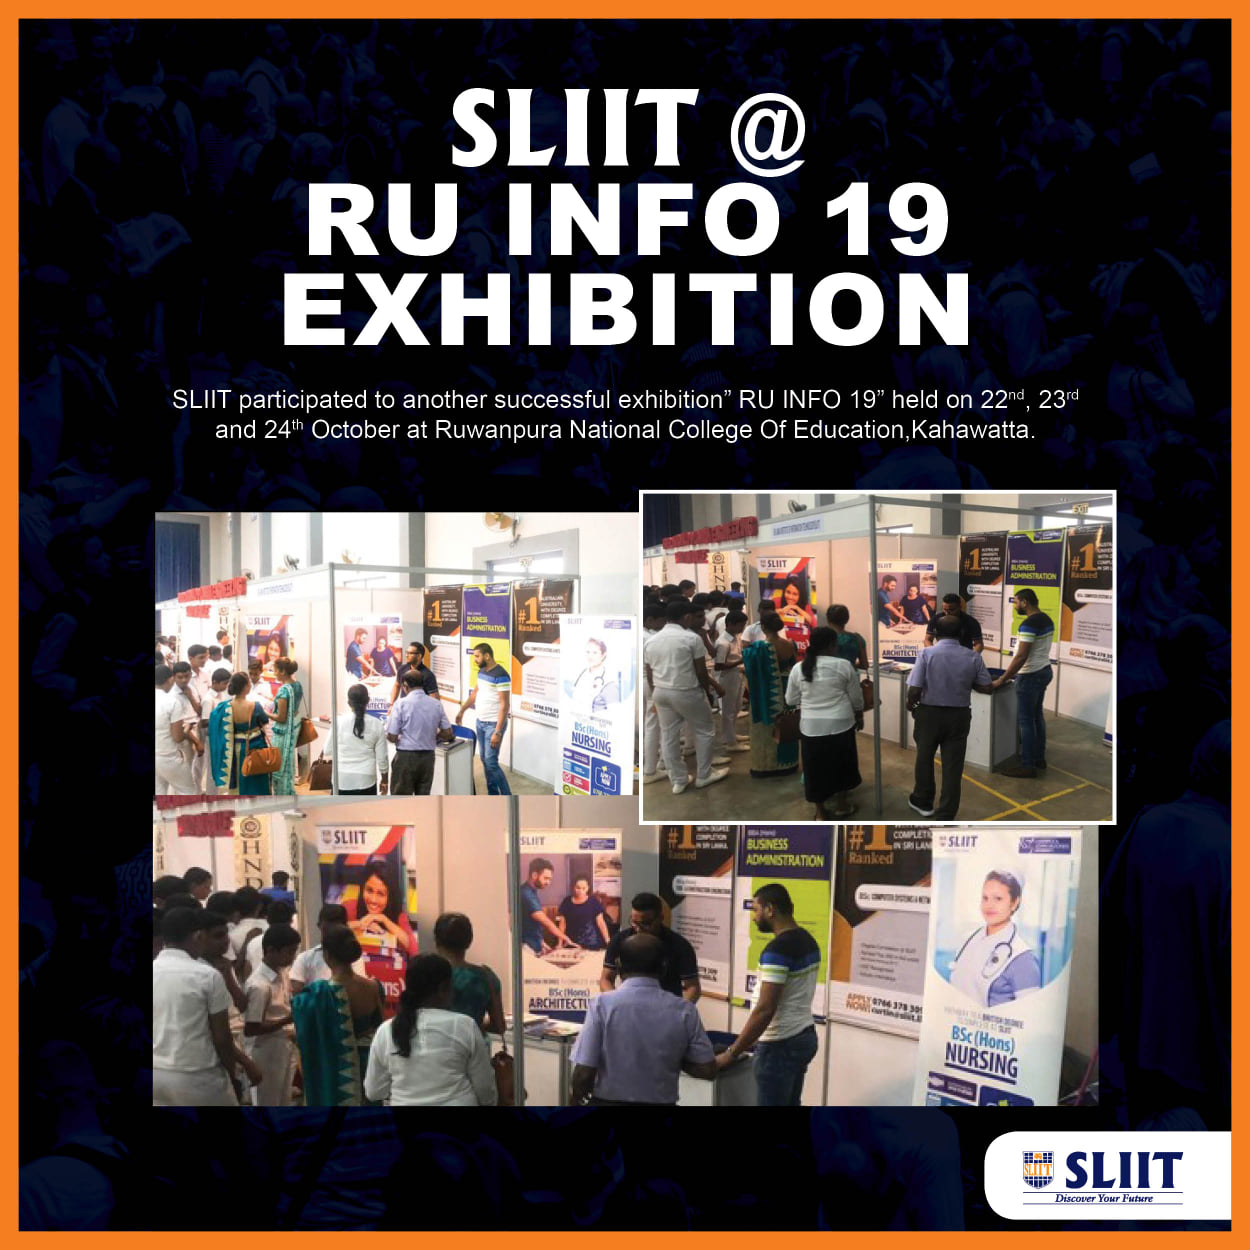 SLIIT-participated-to-another-successful-exhibition-RU-INFO-19